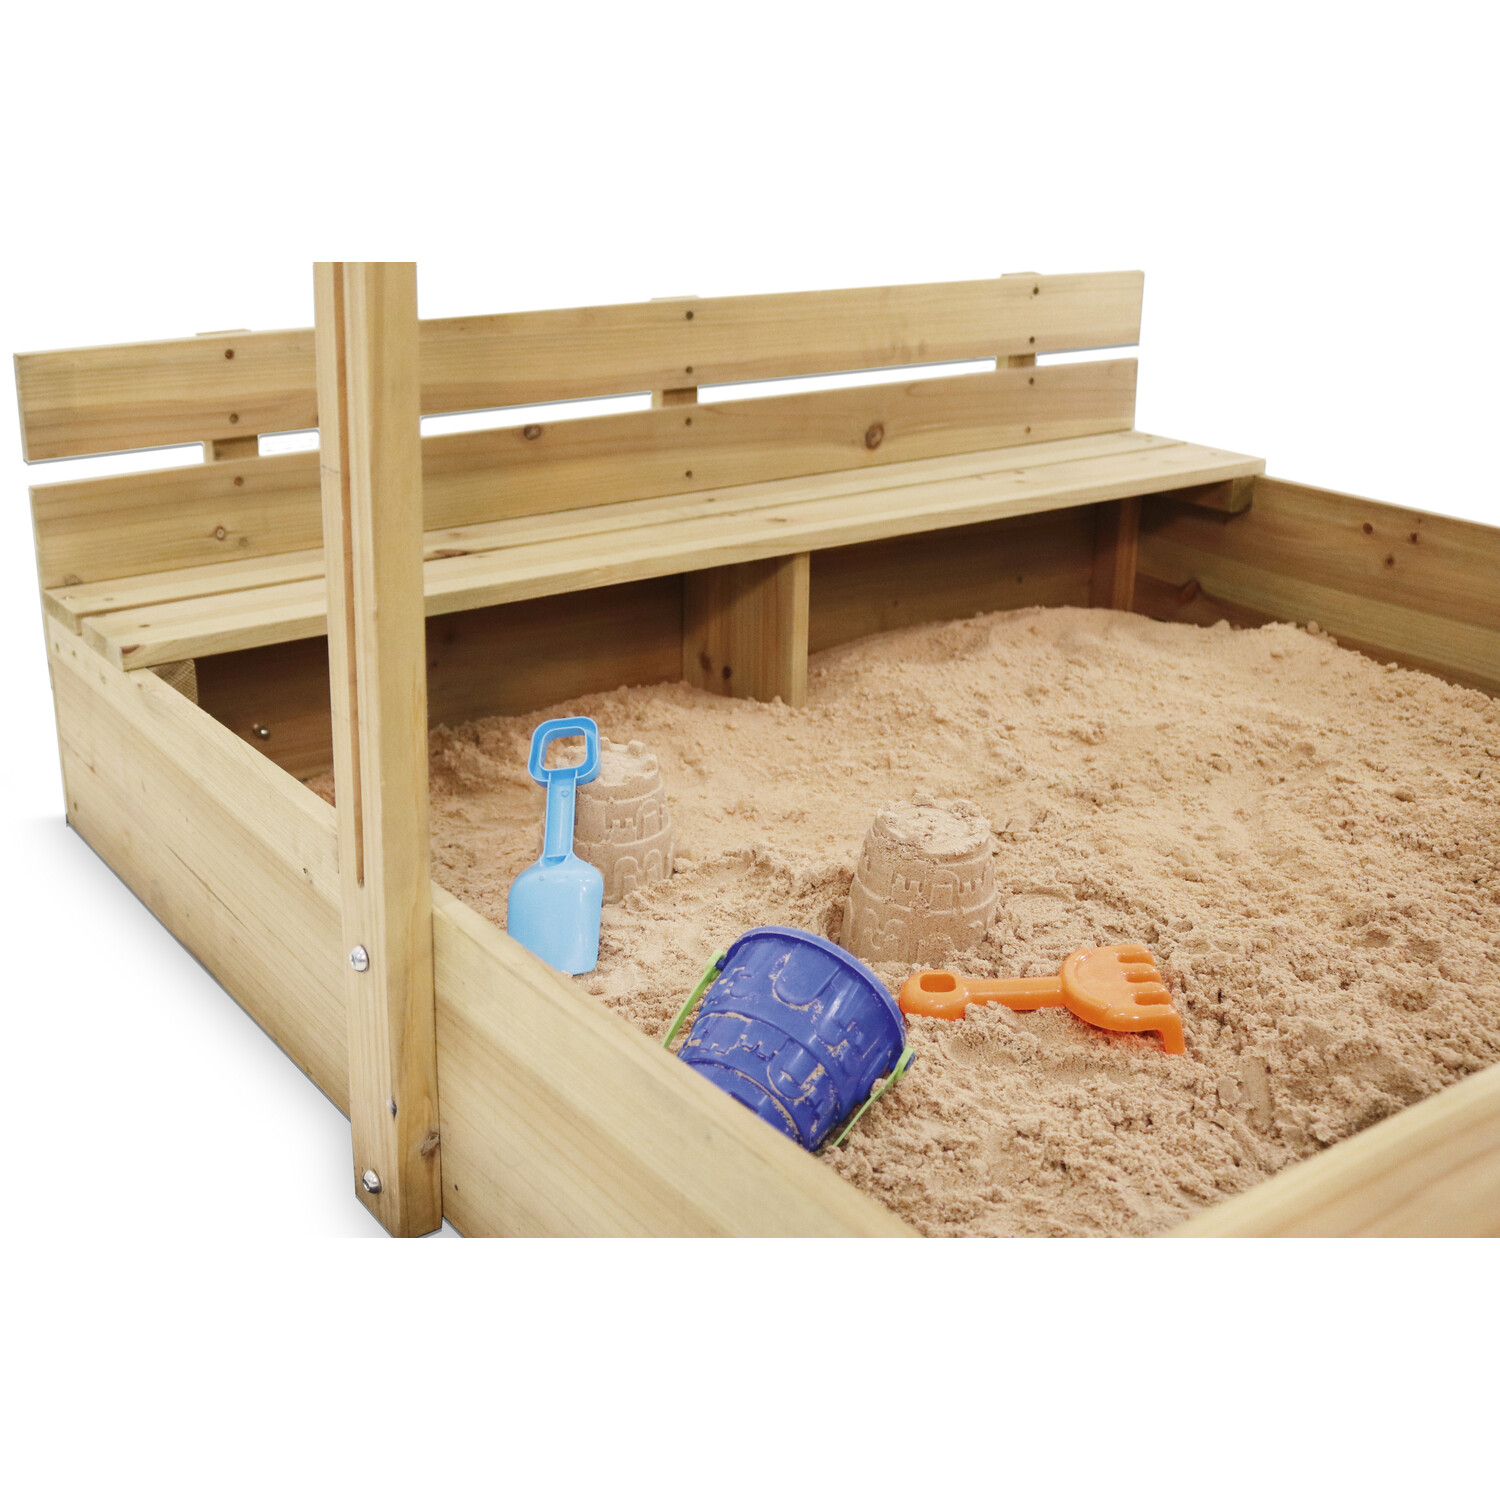 Wooden Sandpit with Canopy - Natural Image 2